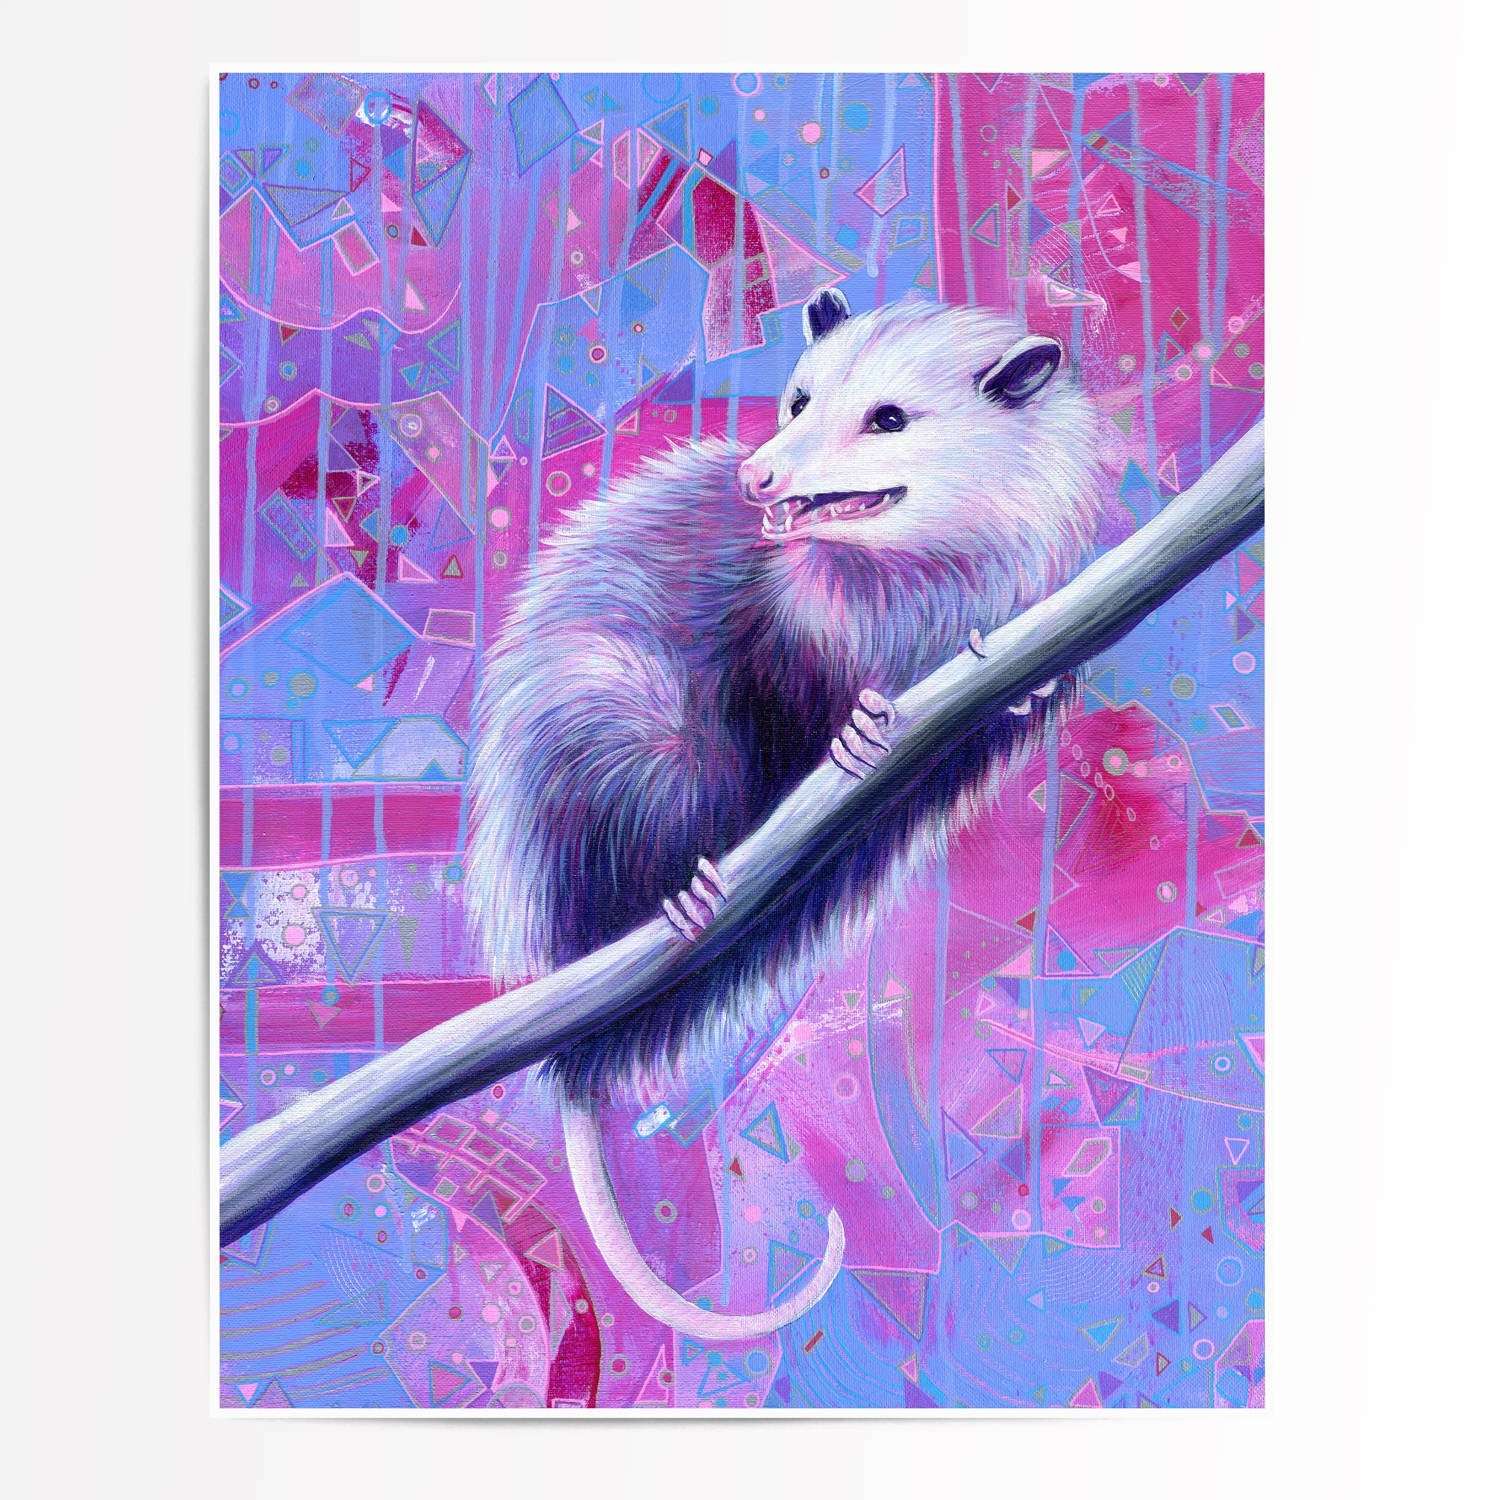 Illustration of an opossum climbing a branch, set against a vivid purple and pink geometric background from the Trash Animals - Fine Art Print Bundle.